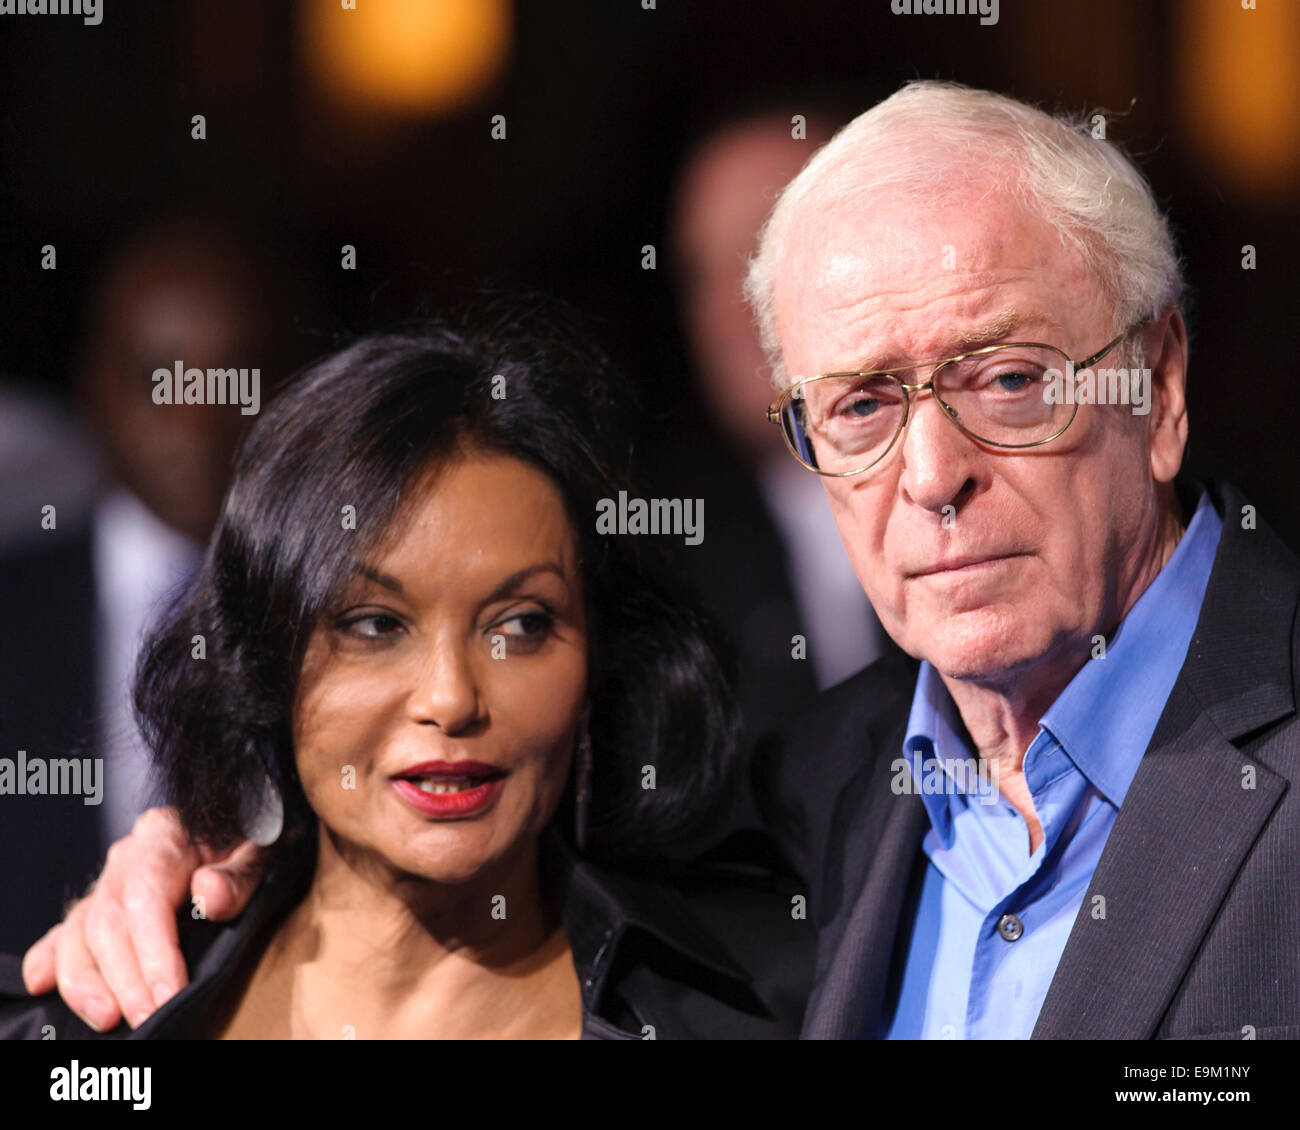 London, UK. 29th October, 2014. Sir Michael Caine attends the THE EUROPEAN PREMIERE OF INTERSTELLAR on 29/10/2014 at ODEON Leicester Square, London. Persons pictured: Michael Caine, Shakira Caine. Credit:  Julie Edwards/Alamy Live News Stock Photo